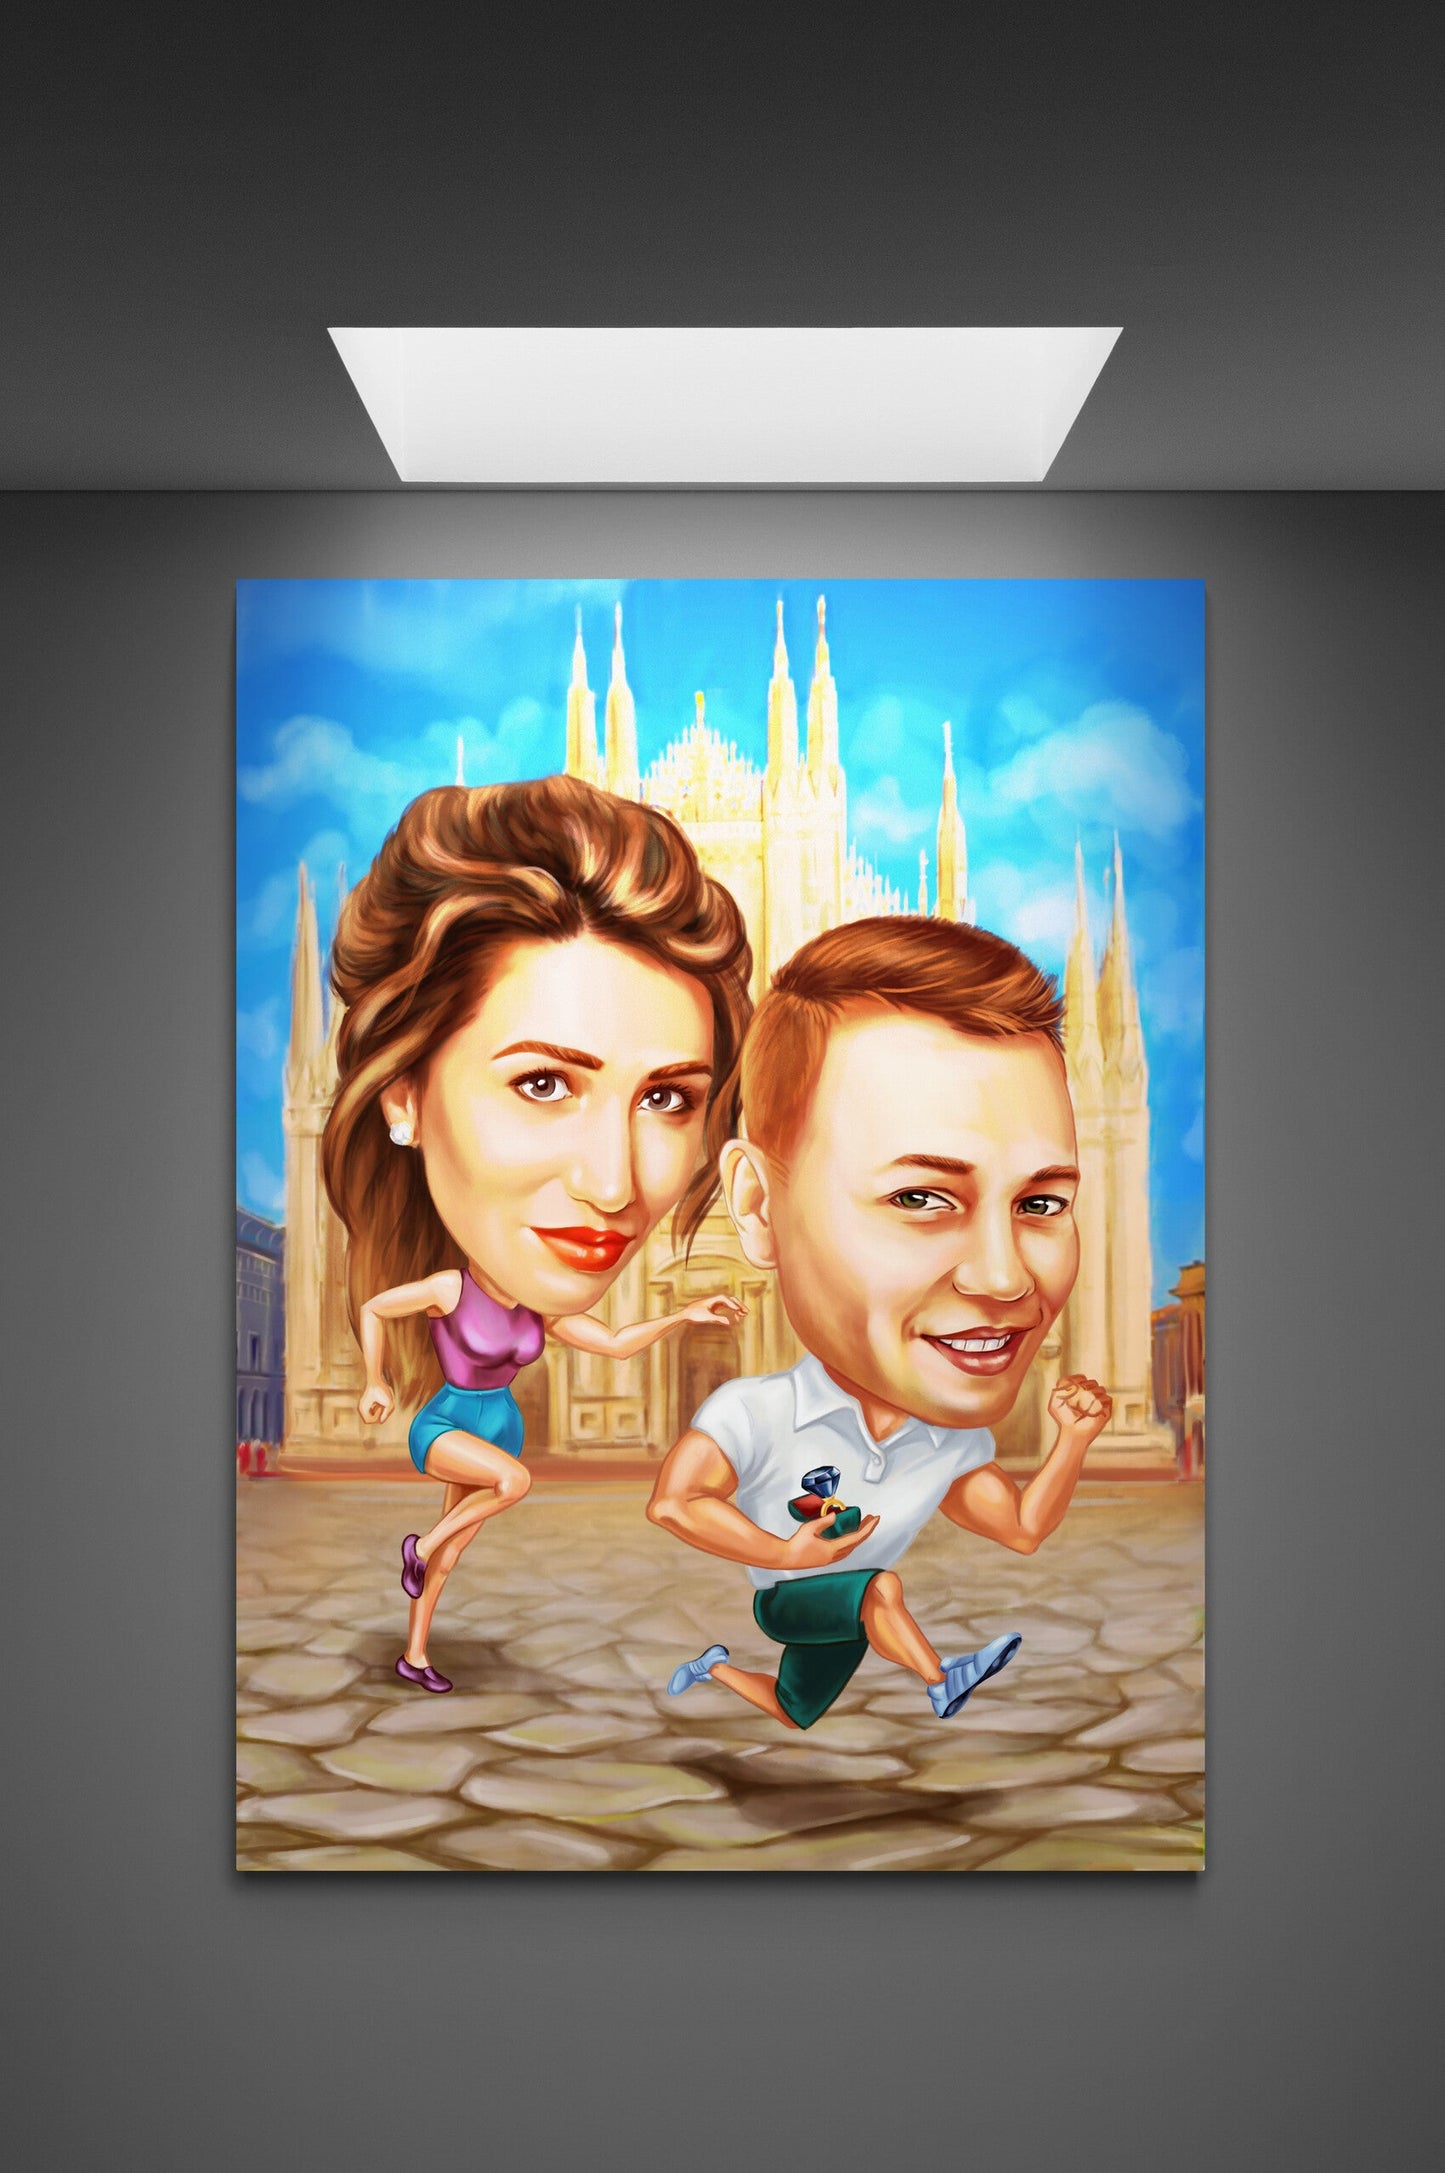 Funny proposal caricature